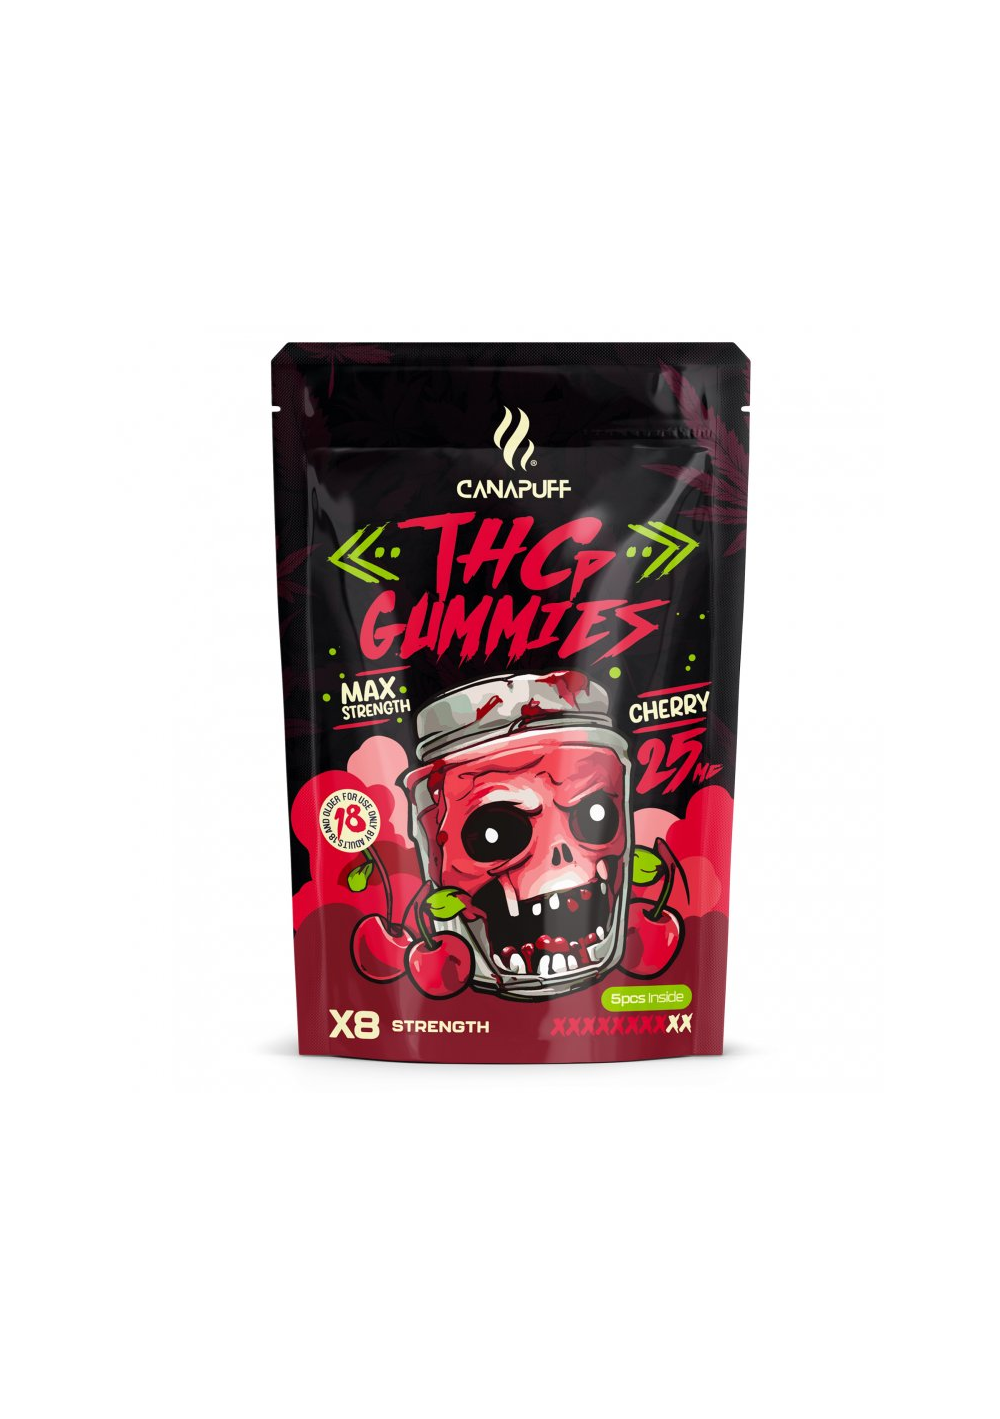 THC-P Green Cherry, 5 pcs, 25mg THCP - Extra Strong - Canapuff